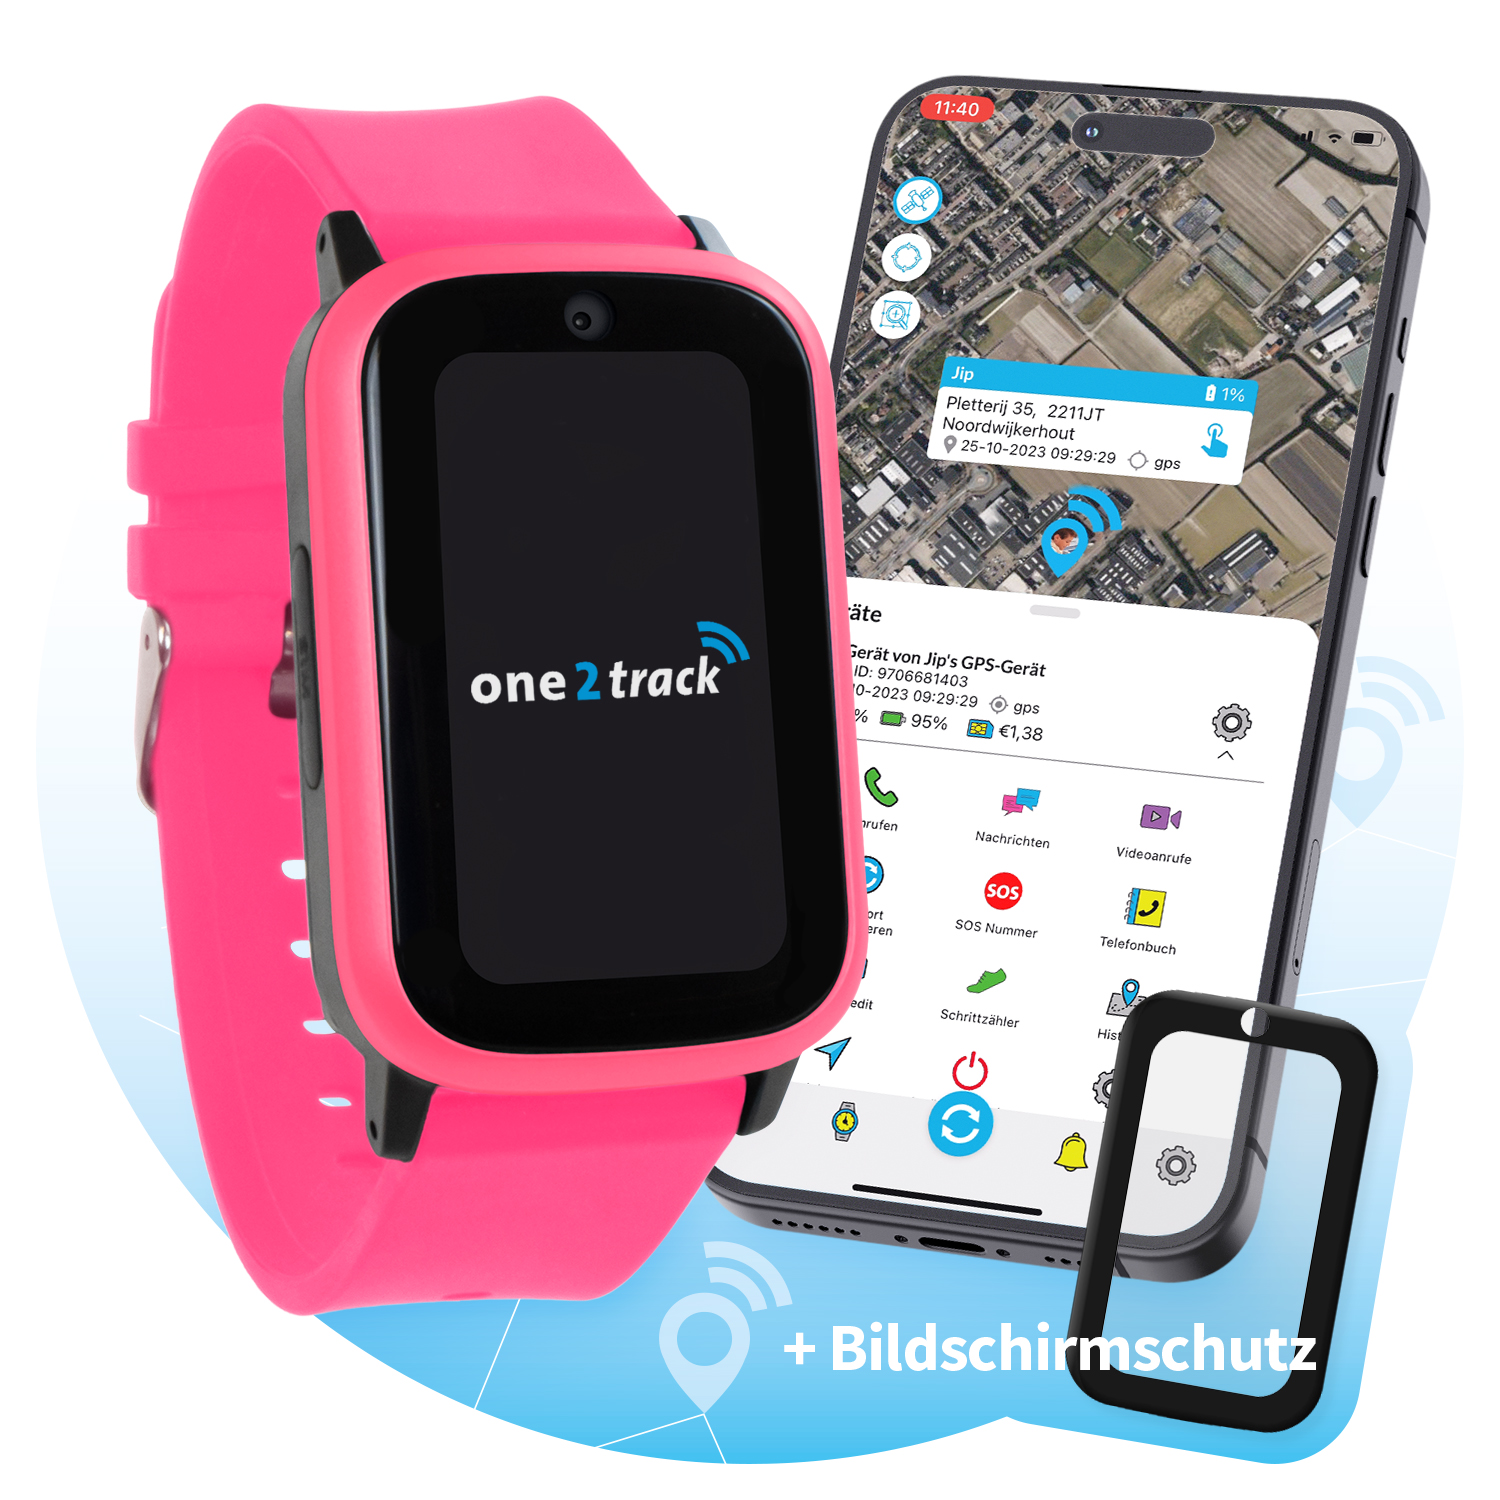 Connect ONE2TRACK Up, Rosa Smartwatch, Kinder